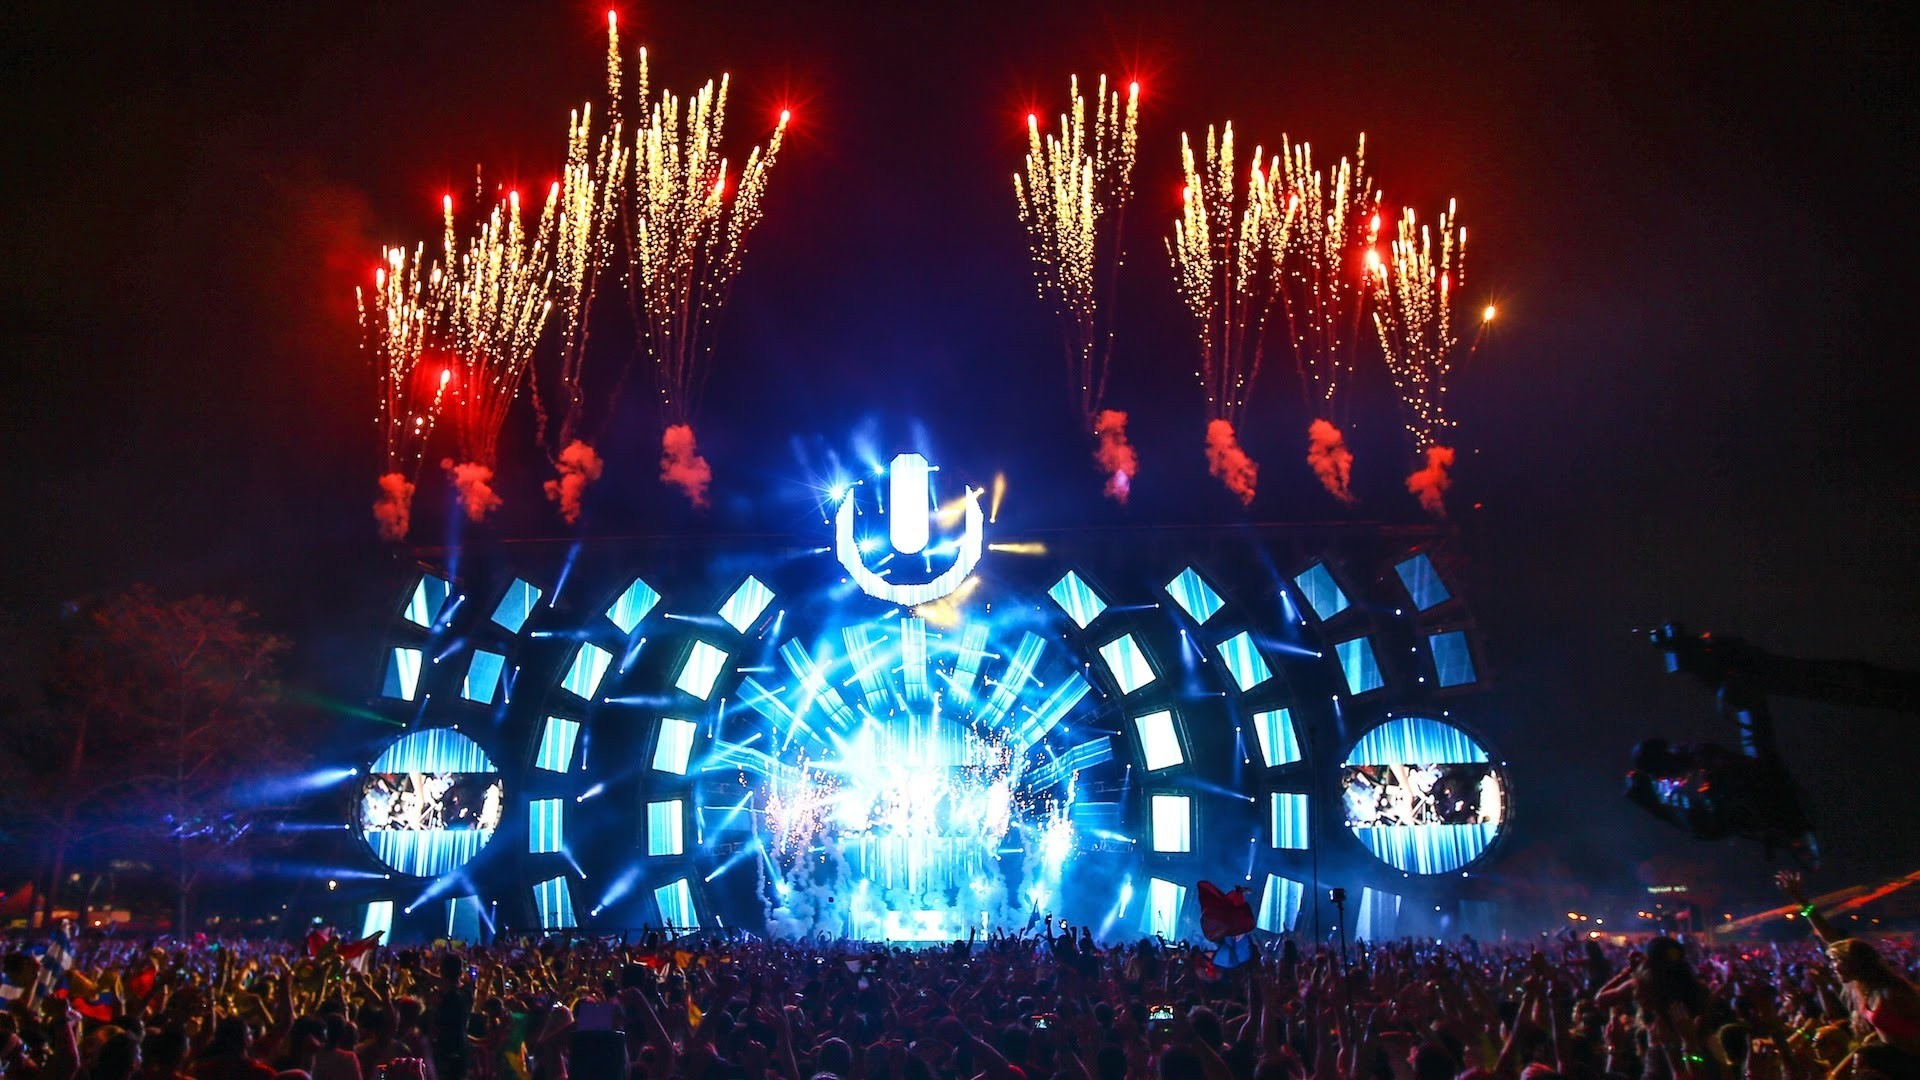 1920x1080 Wallpaper : night, fireworks, world, entertainment, Ultra Music Festival, festival, performance, stage, darkness, crowd, tradition, recreation, px, special effects, rock concert, music venue, fete, public event 824780 HD ..